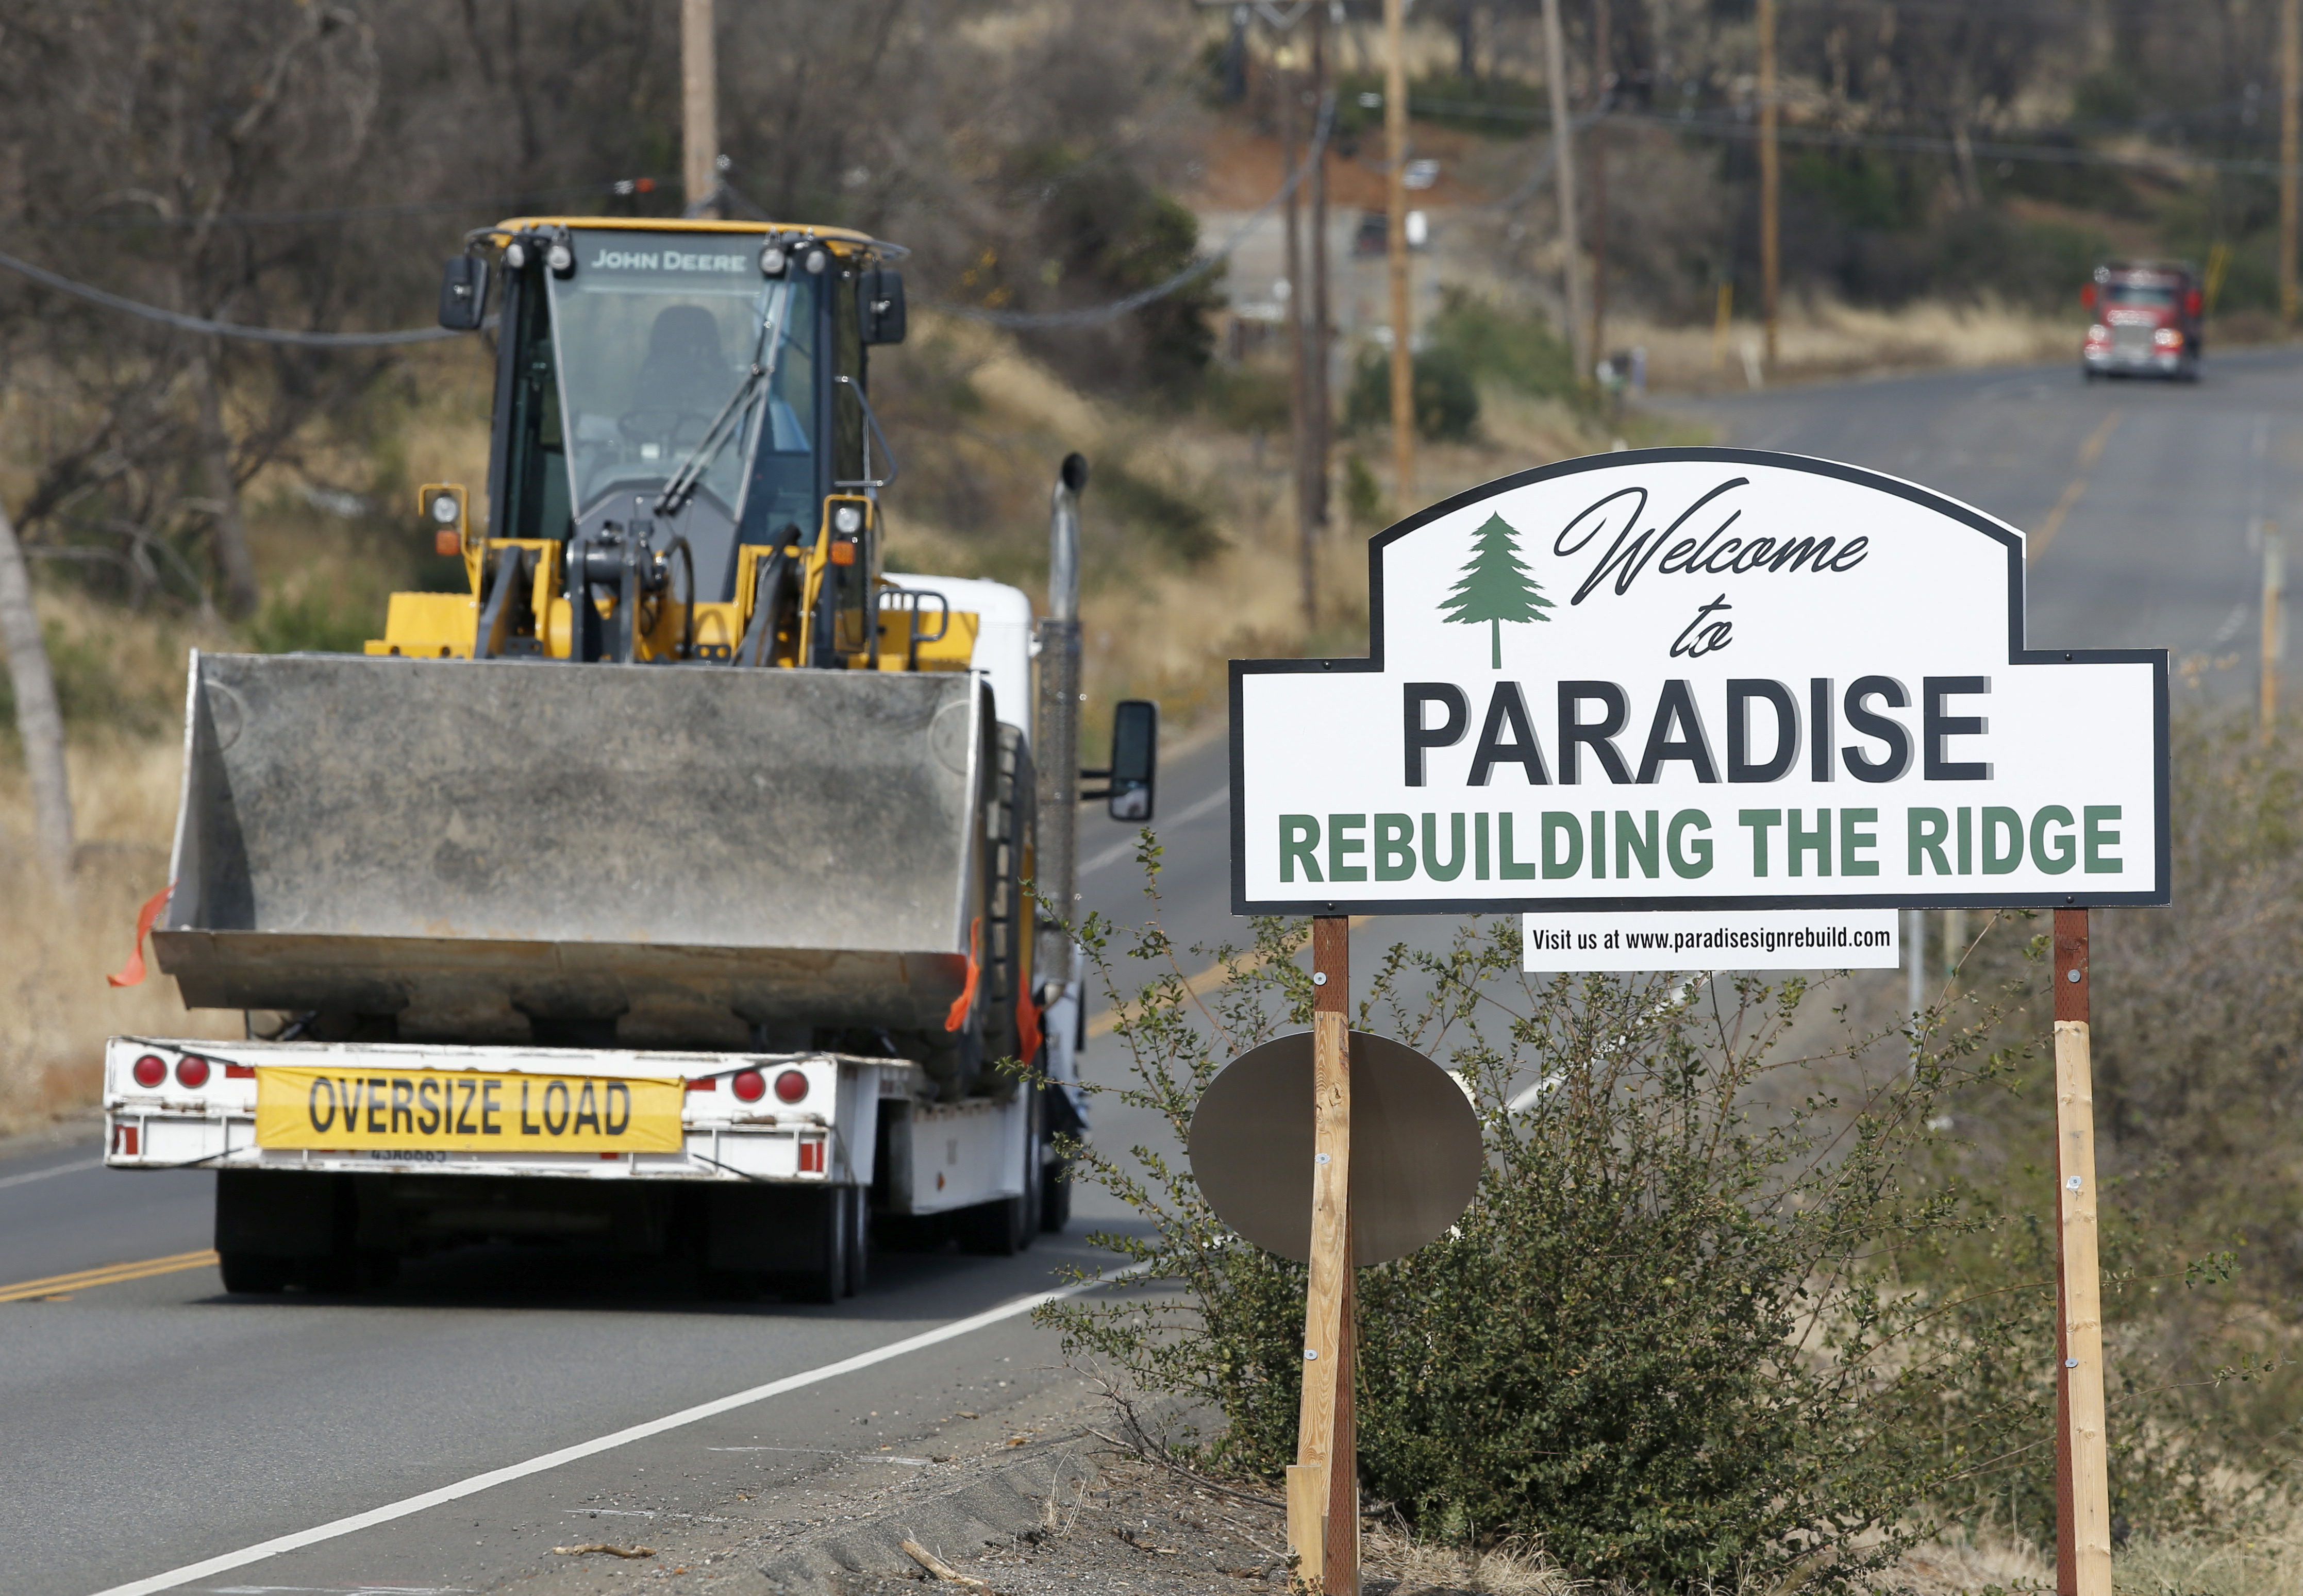 Vehicles pass a sign welcoming people to Paradise, Calif., Tuesday Nov. 5, 2019. The sign also displays the slogan, 